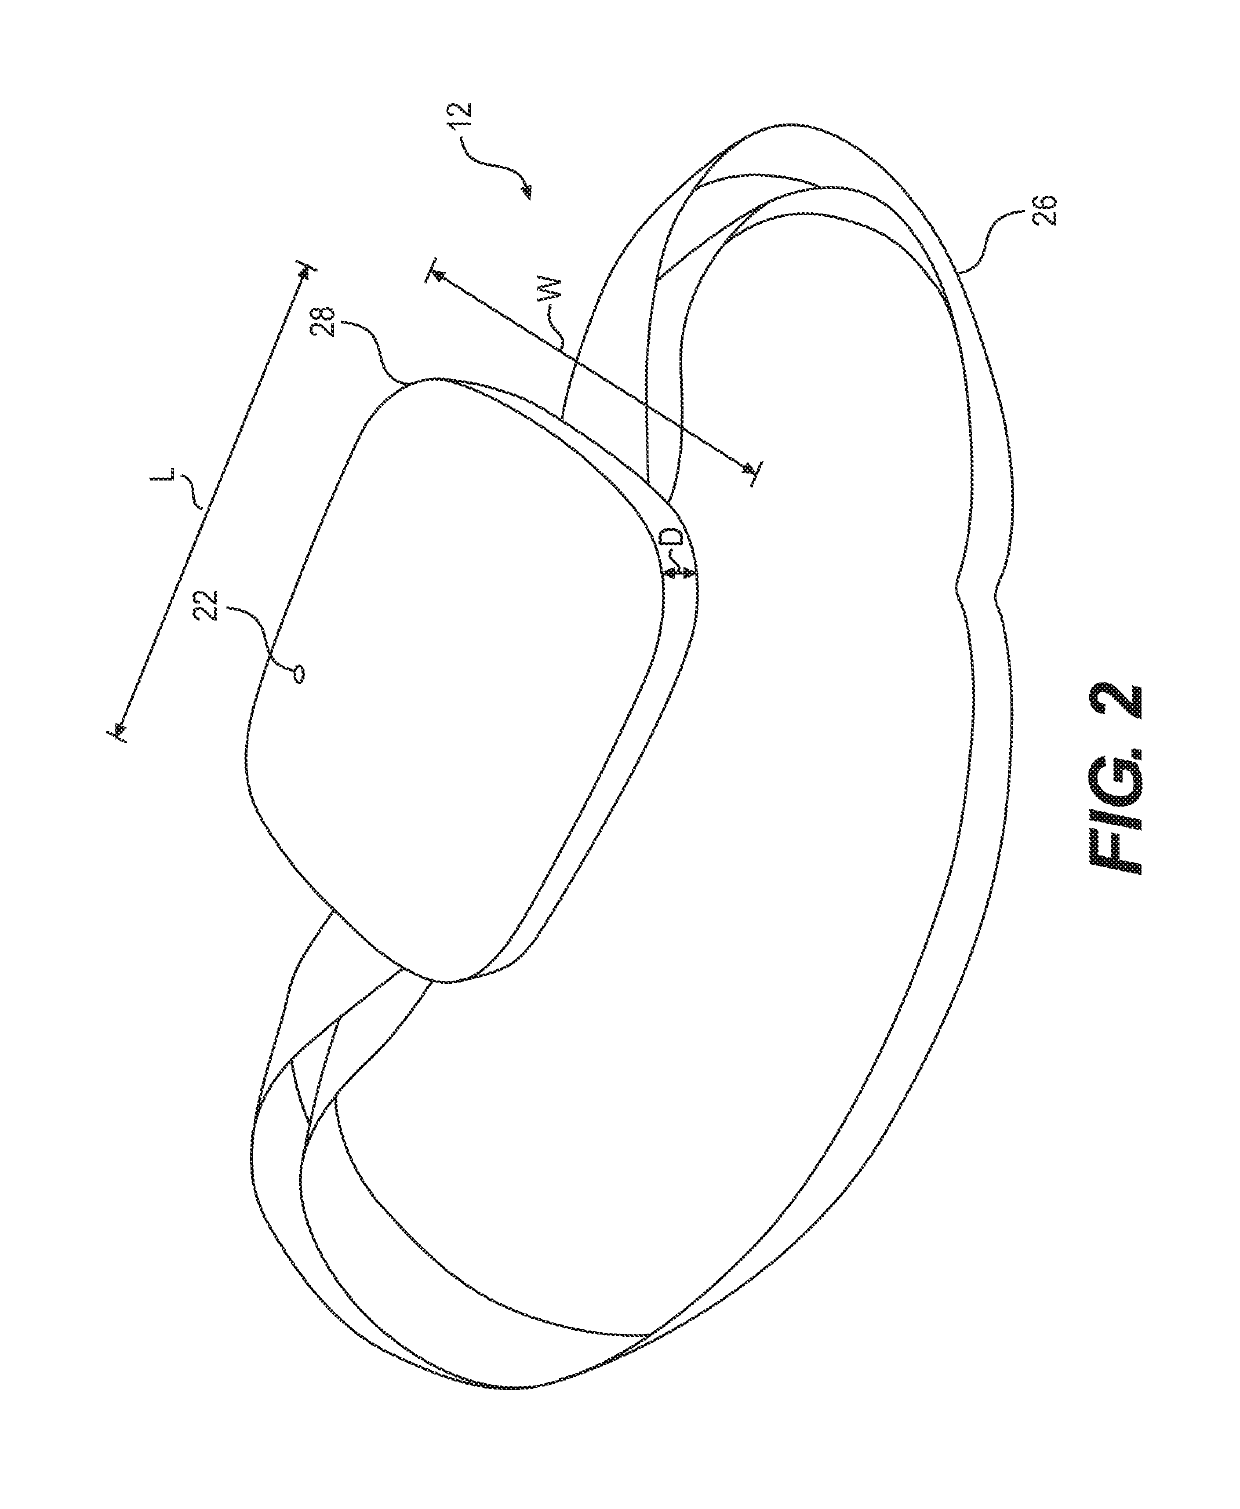 Systems and methods for medical monitoring